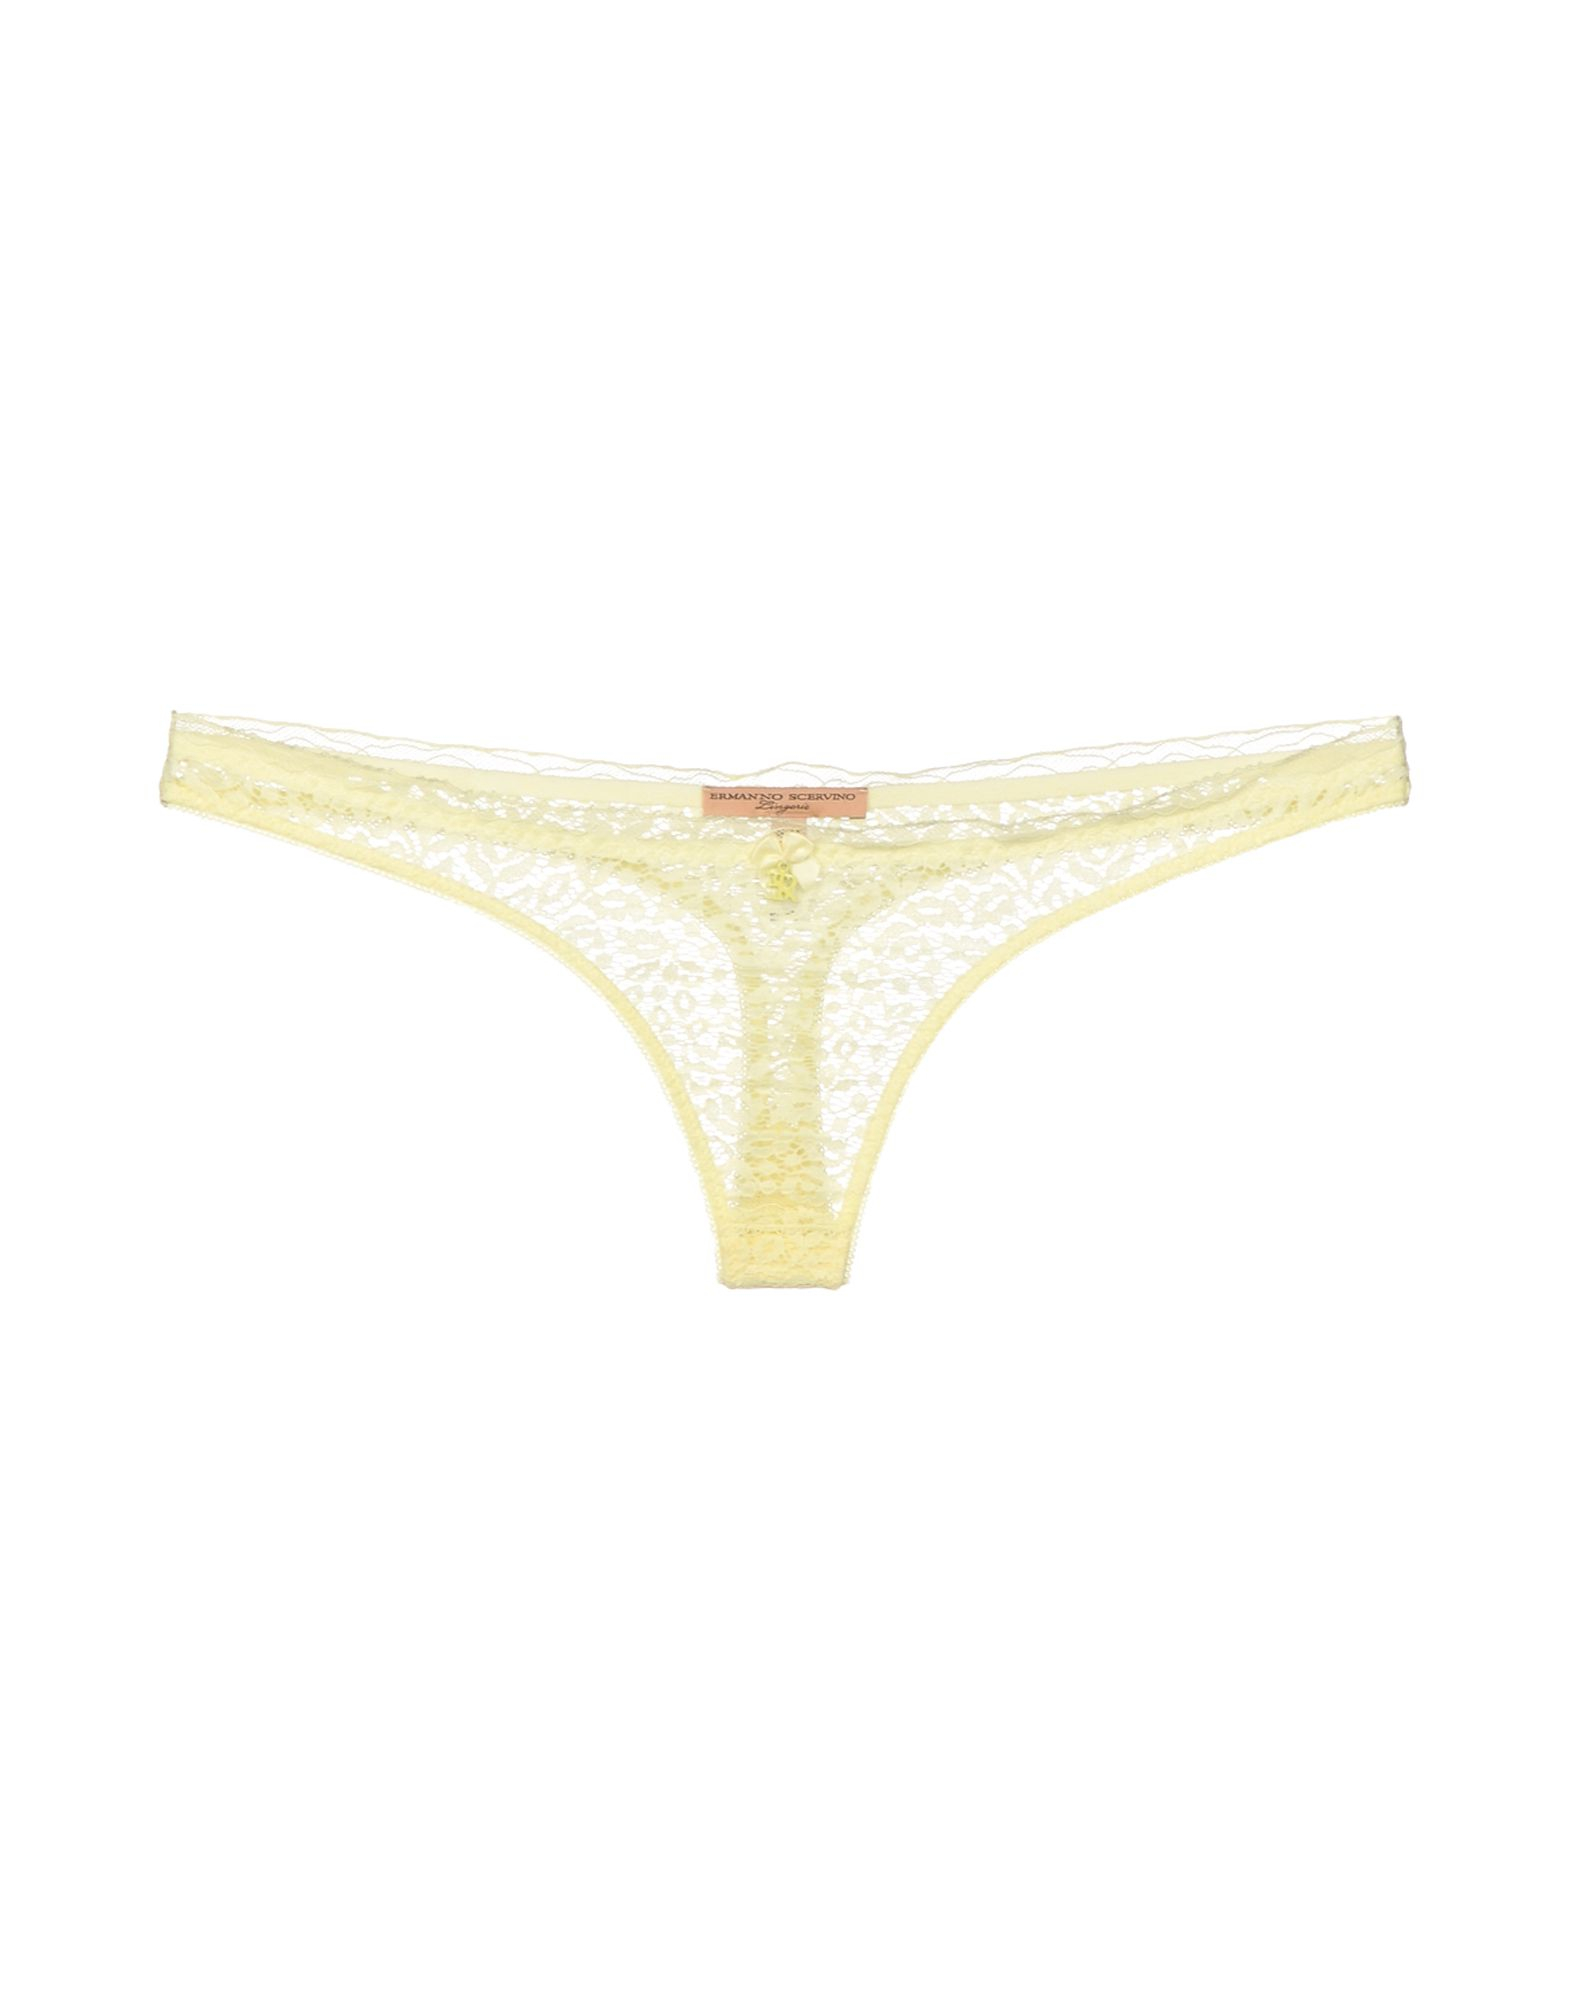 Ermanno scervino G-string in Yellow | Lyst